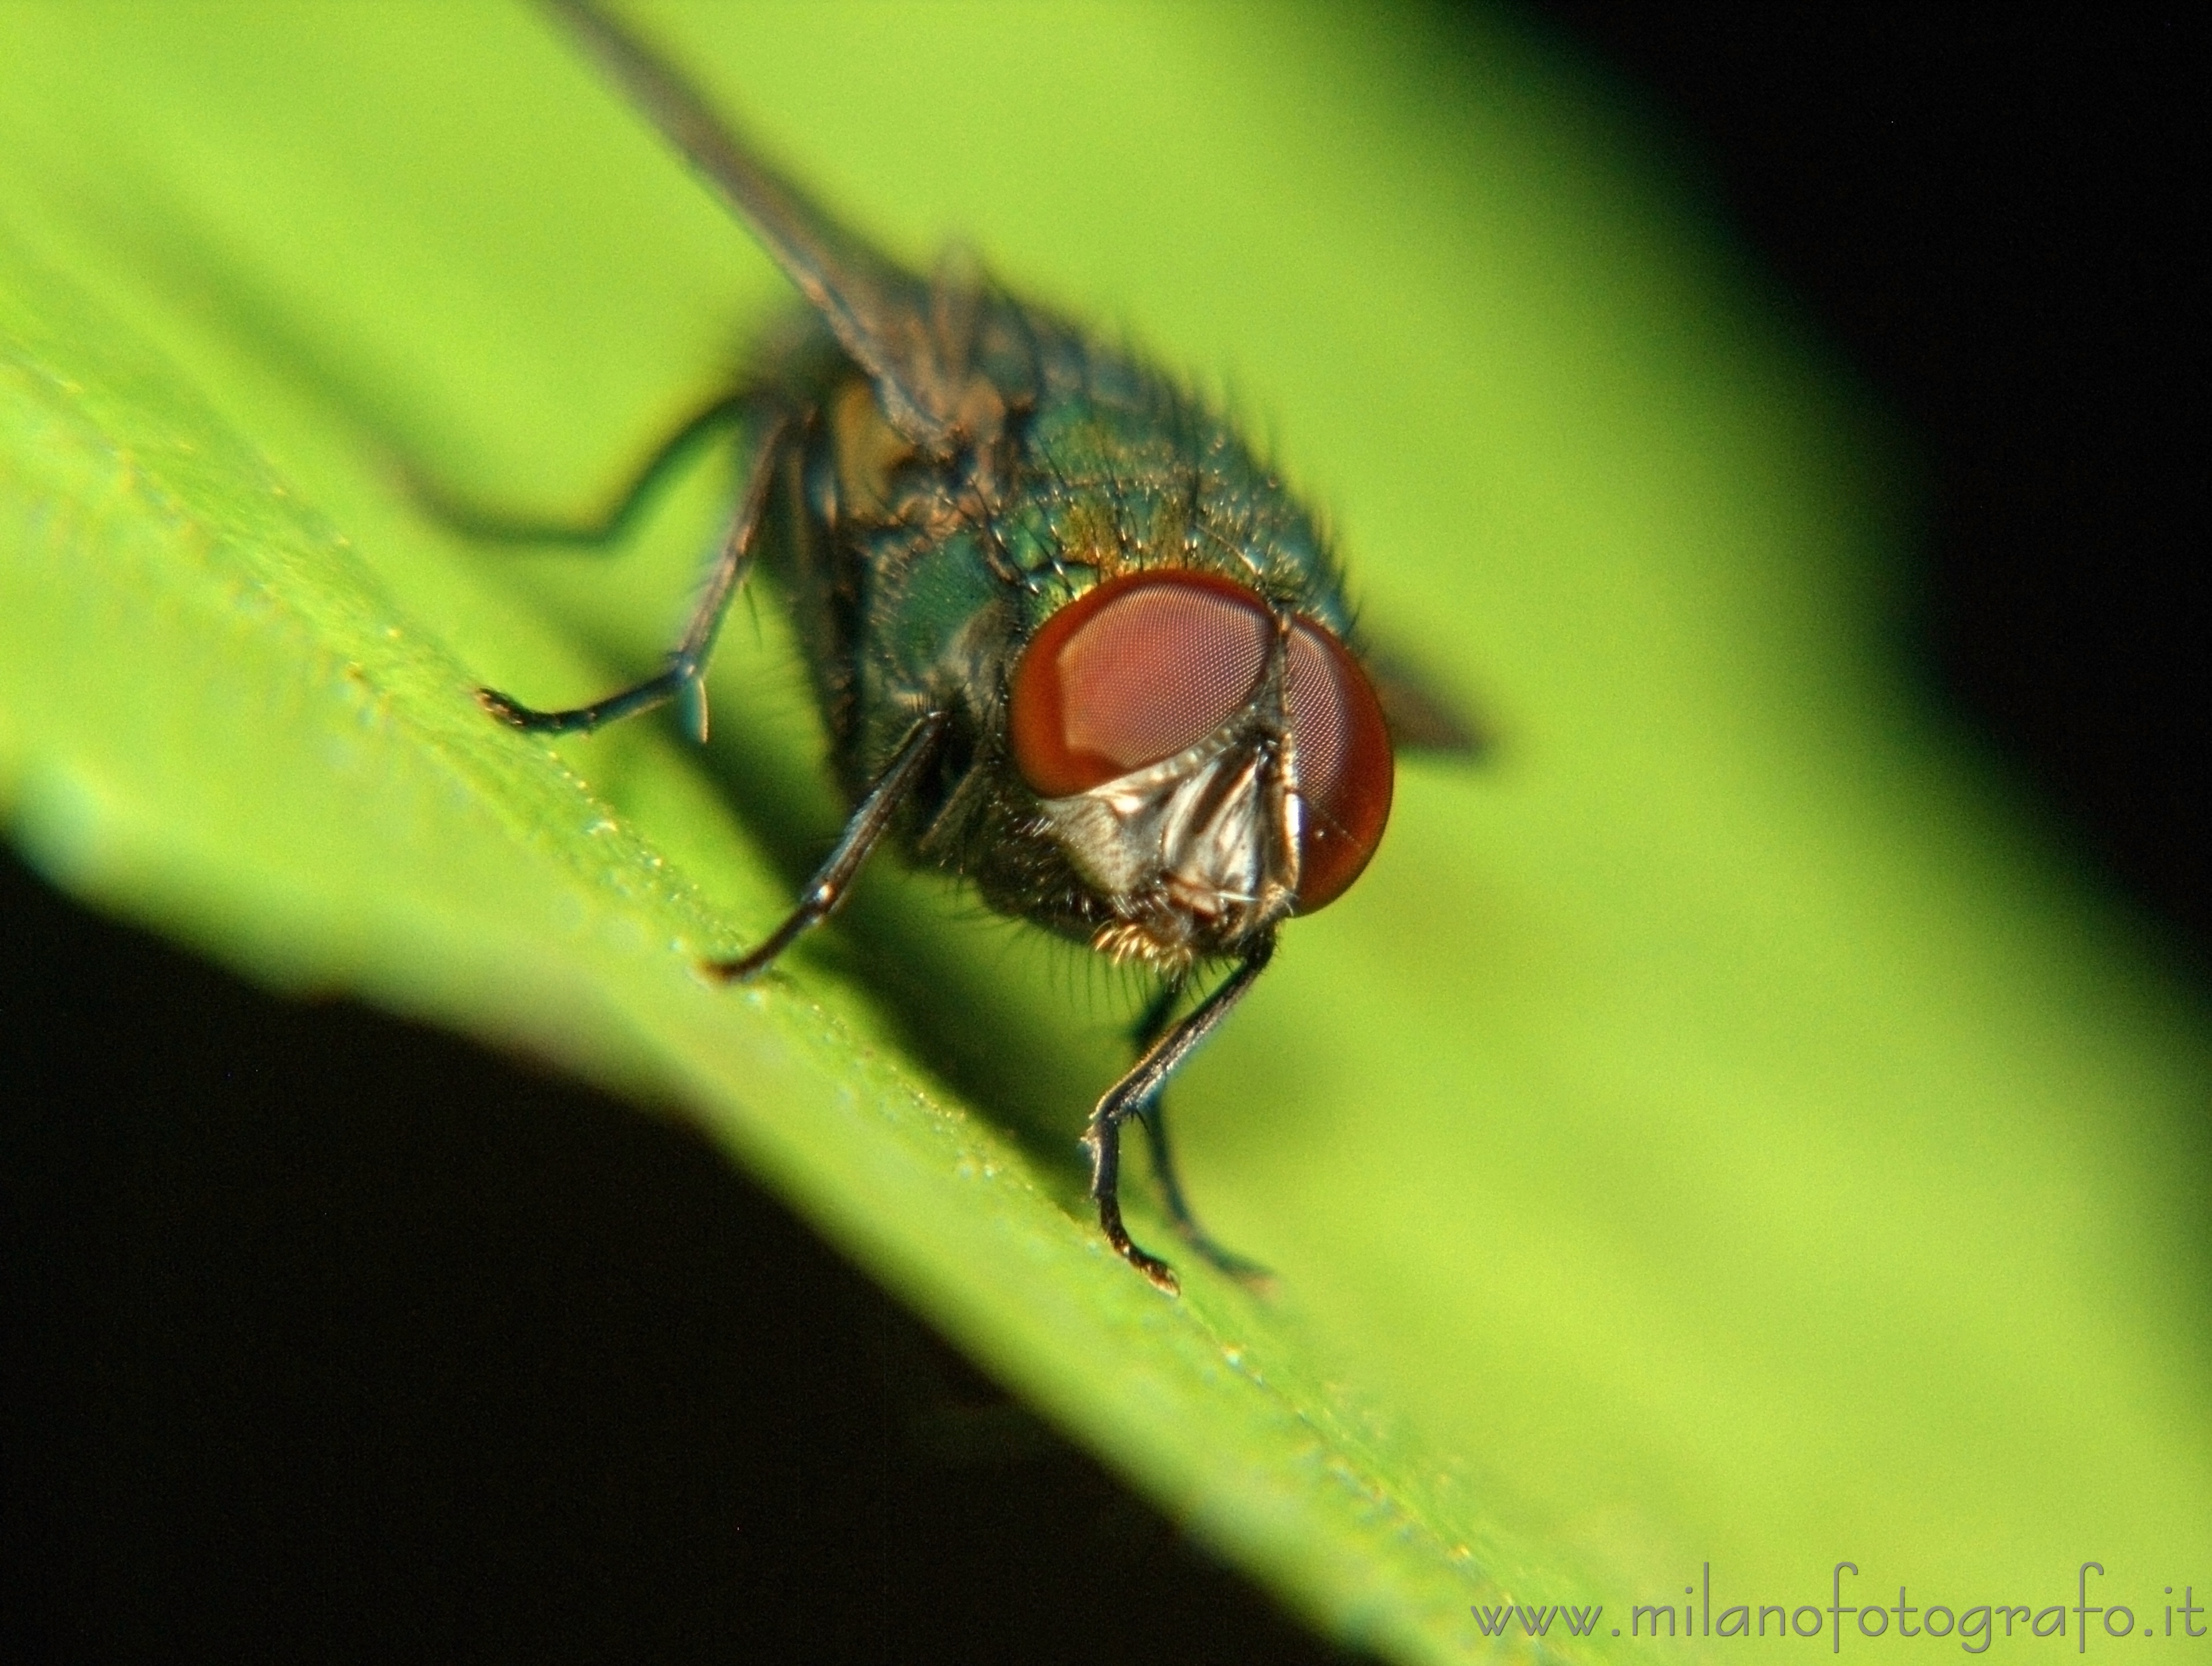 Cadrezzate (Varese, Italy): Portrait of a fly, probably Lucilia caesar - Cadrezzate (Varese, Italy)